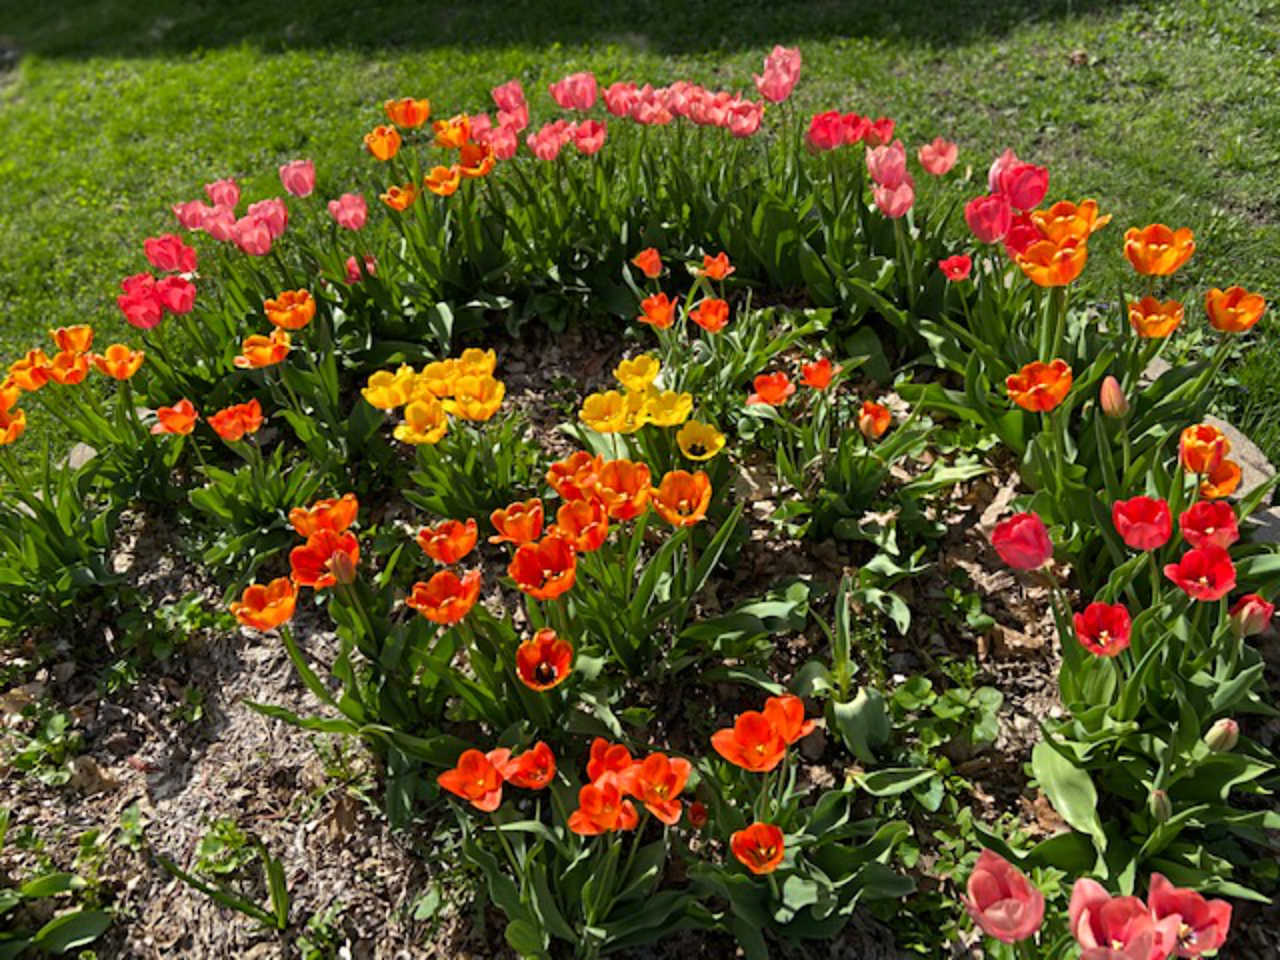 Large oval round of bright red. orange, yellow, and pink tulips